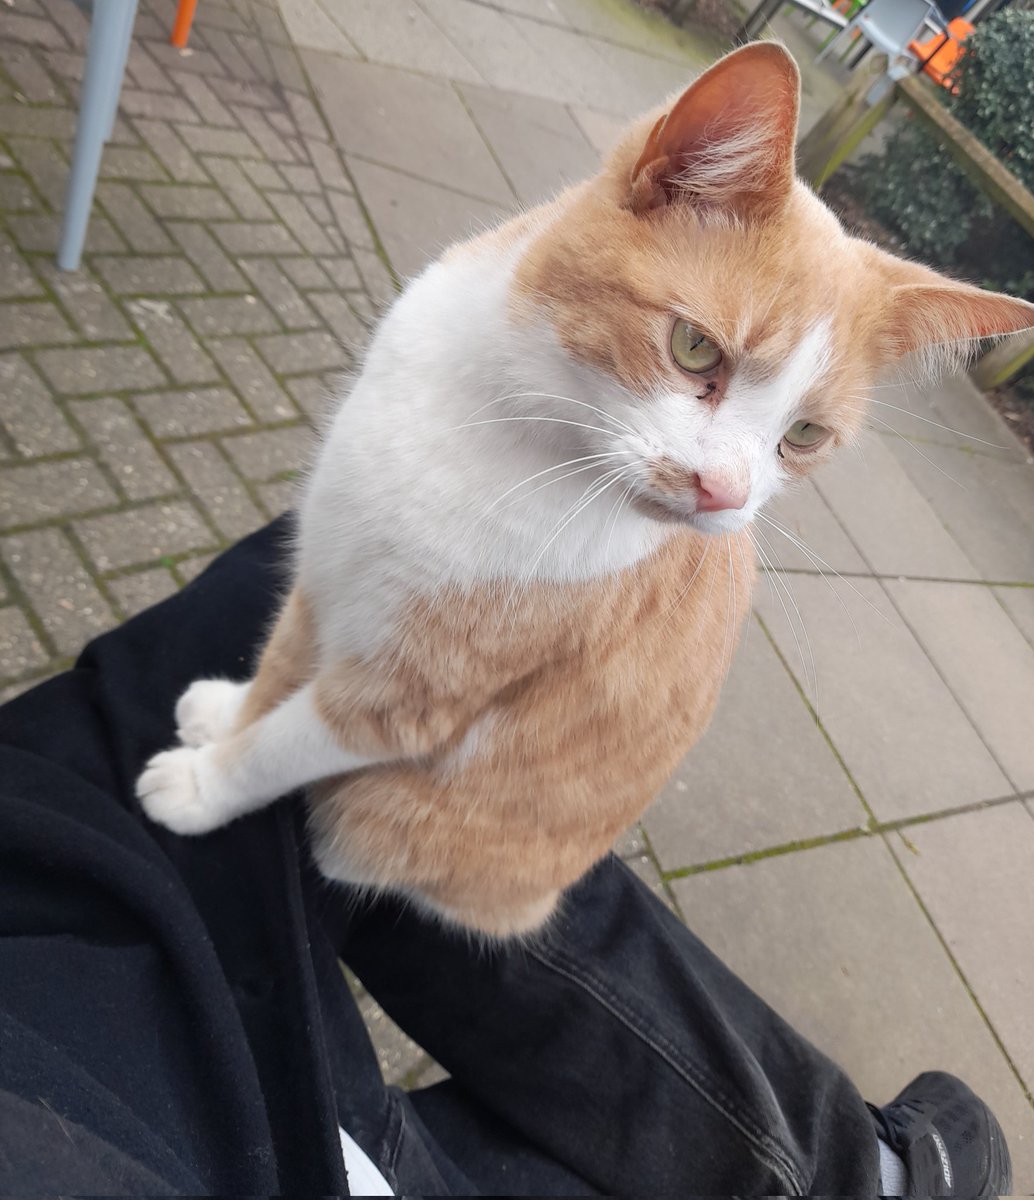 Slyvester joined me on the UEA campus earlier to help with my essay marking. 🐈😻🐈 #uea #academicswithcats